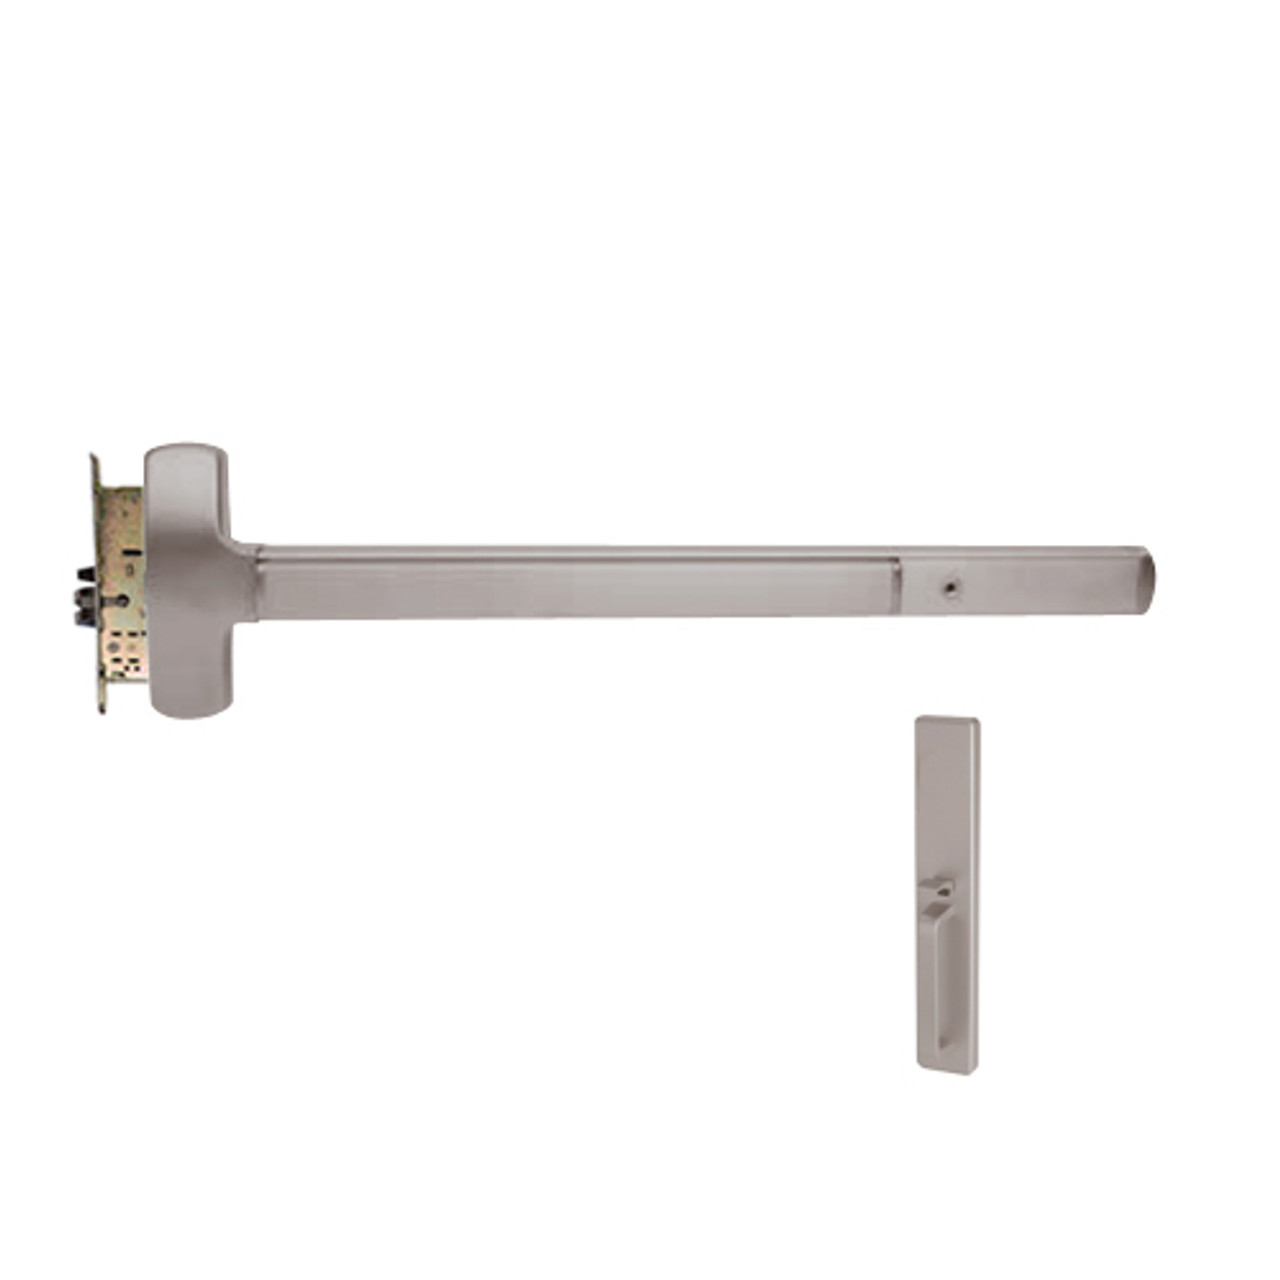 25-M-TP-BE-US28-3-RHR Falcon Exit Device in Anodized Aluminum